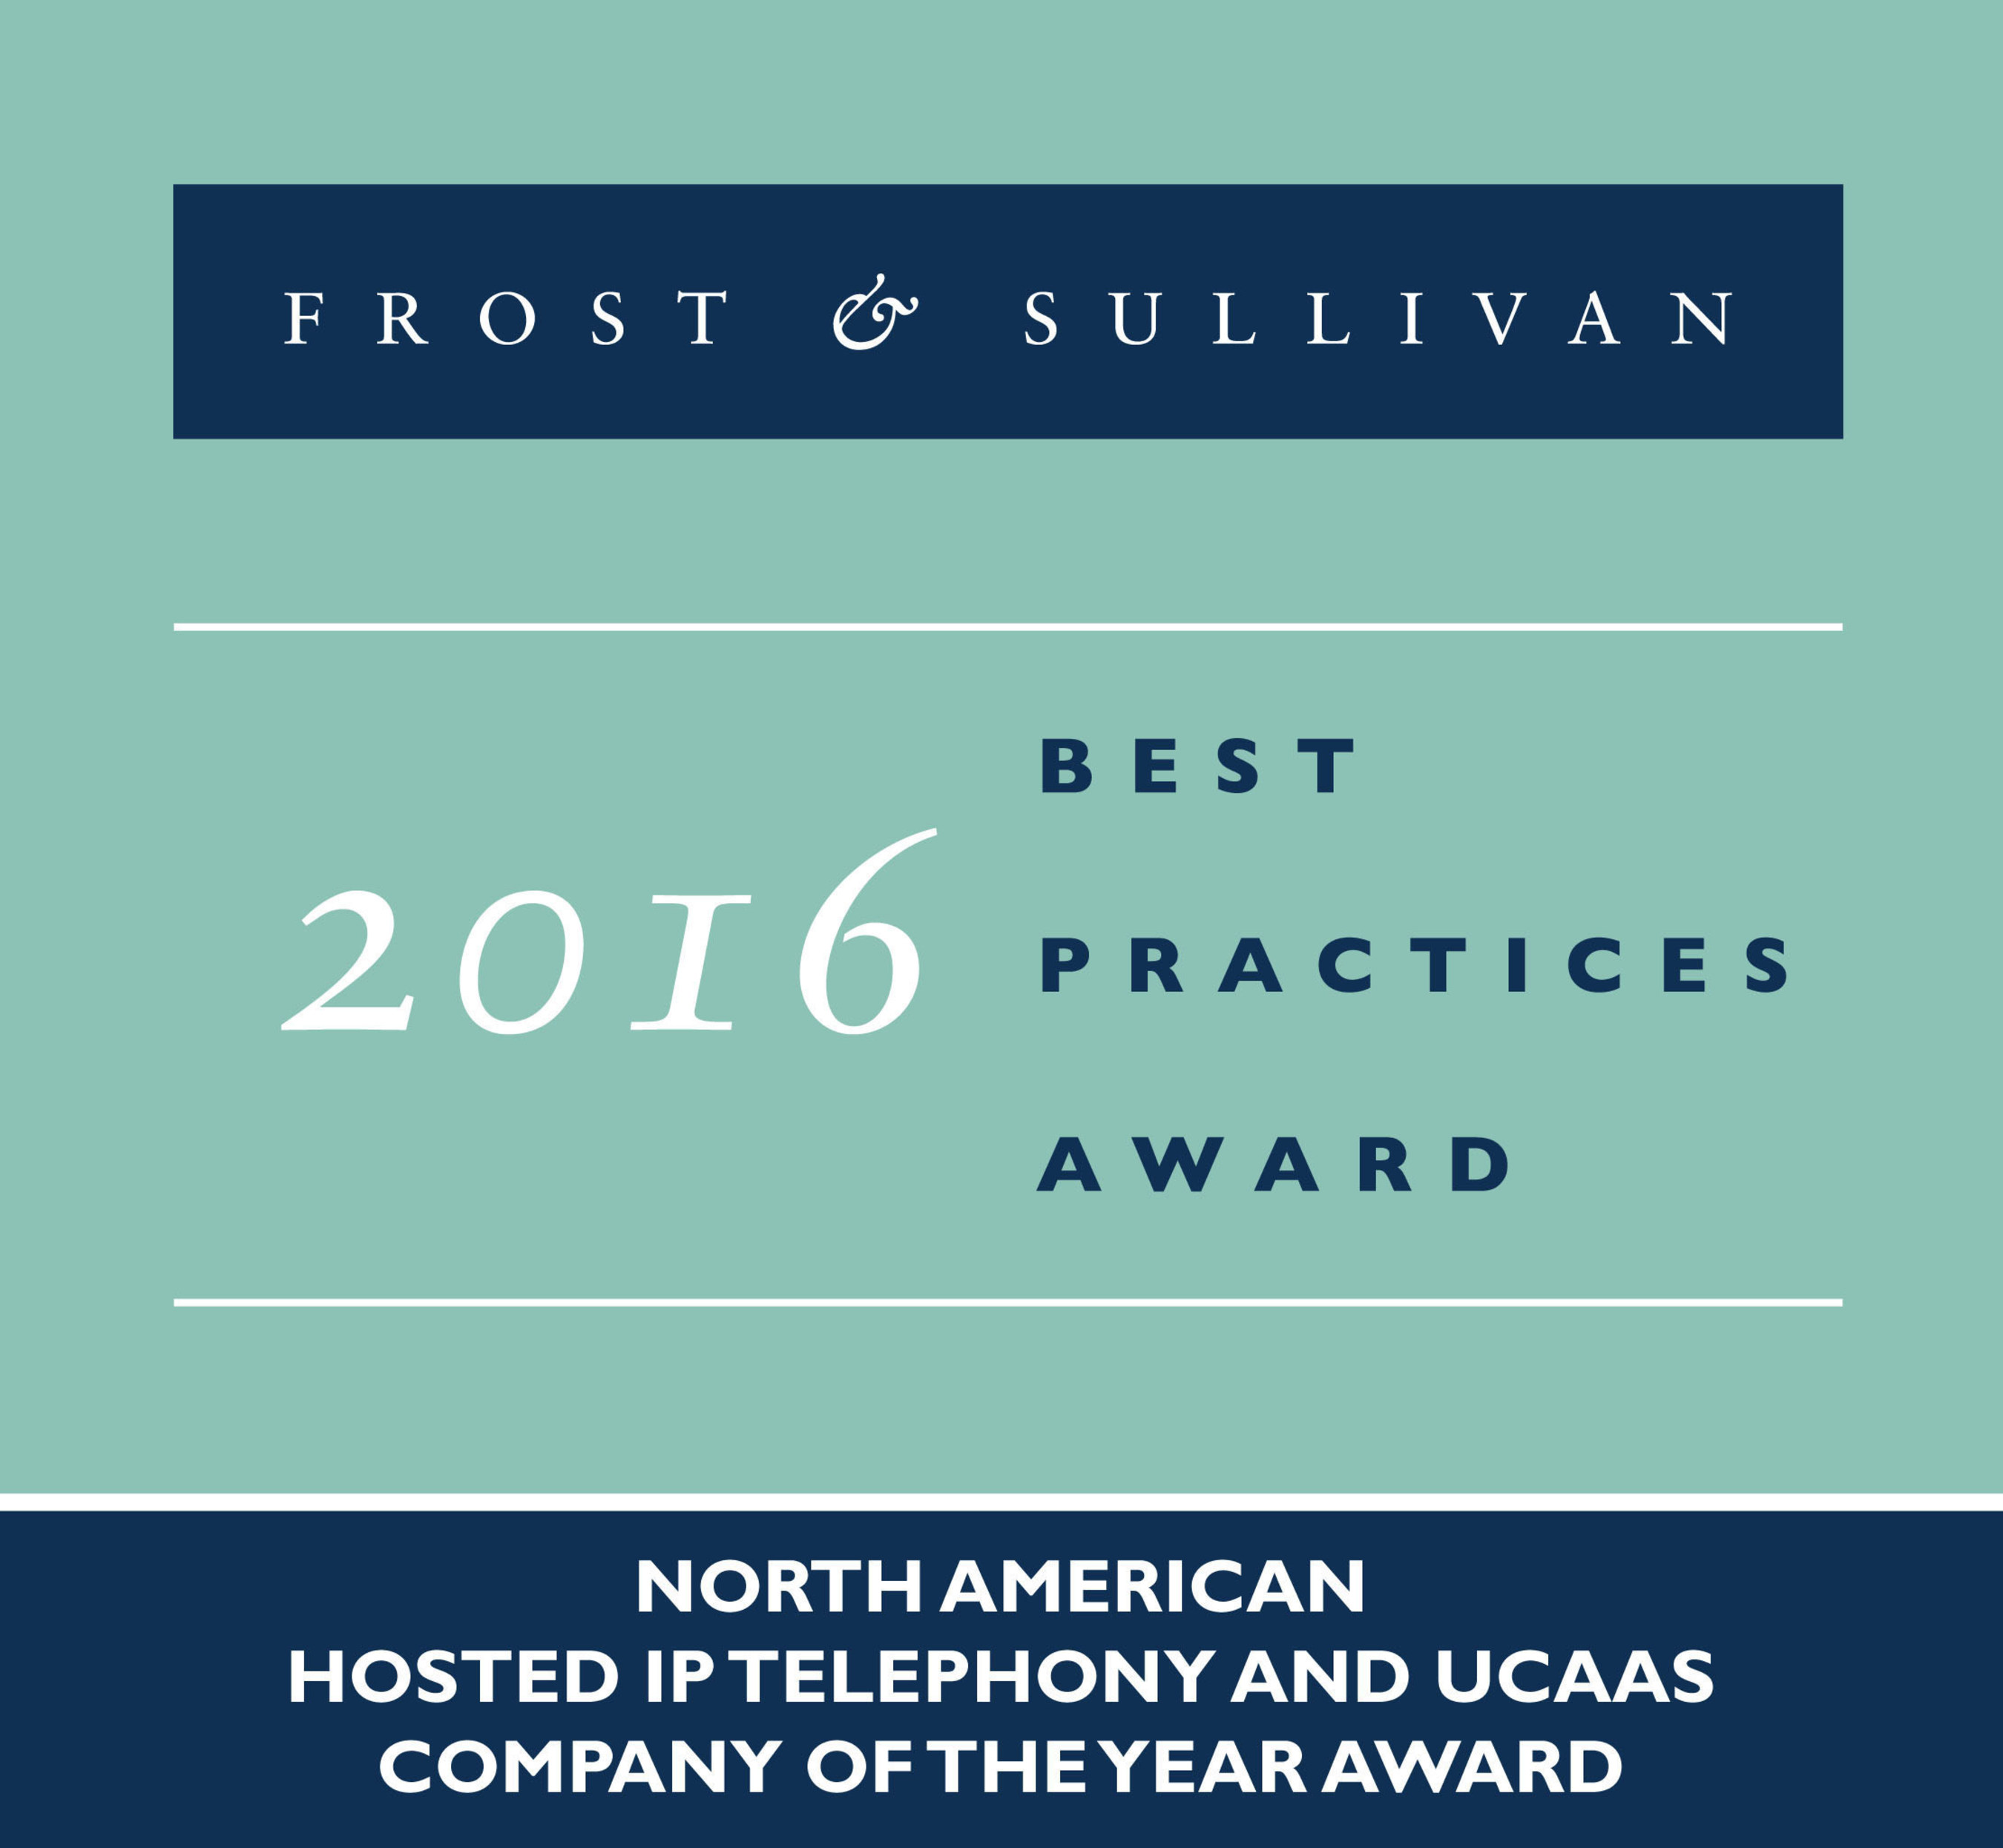 RingCentral is recognized with Frost & Sullivan's 2016 North American Company of the Year Award.